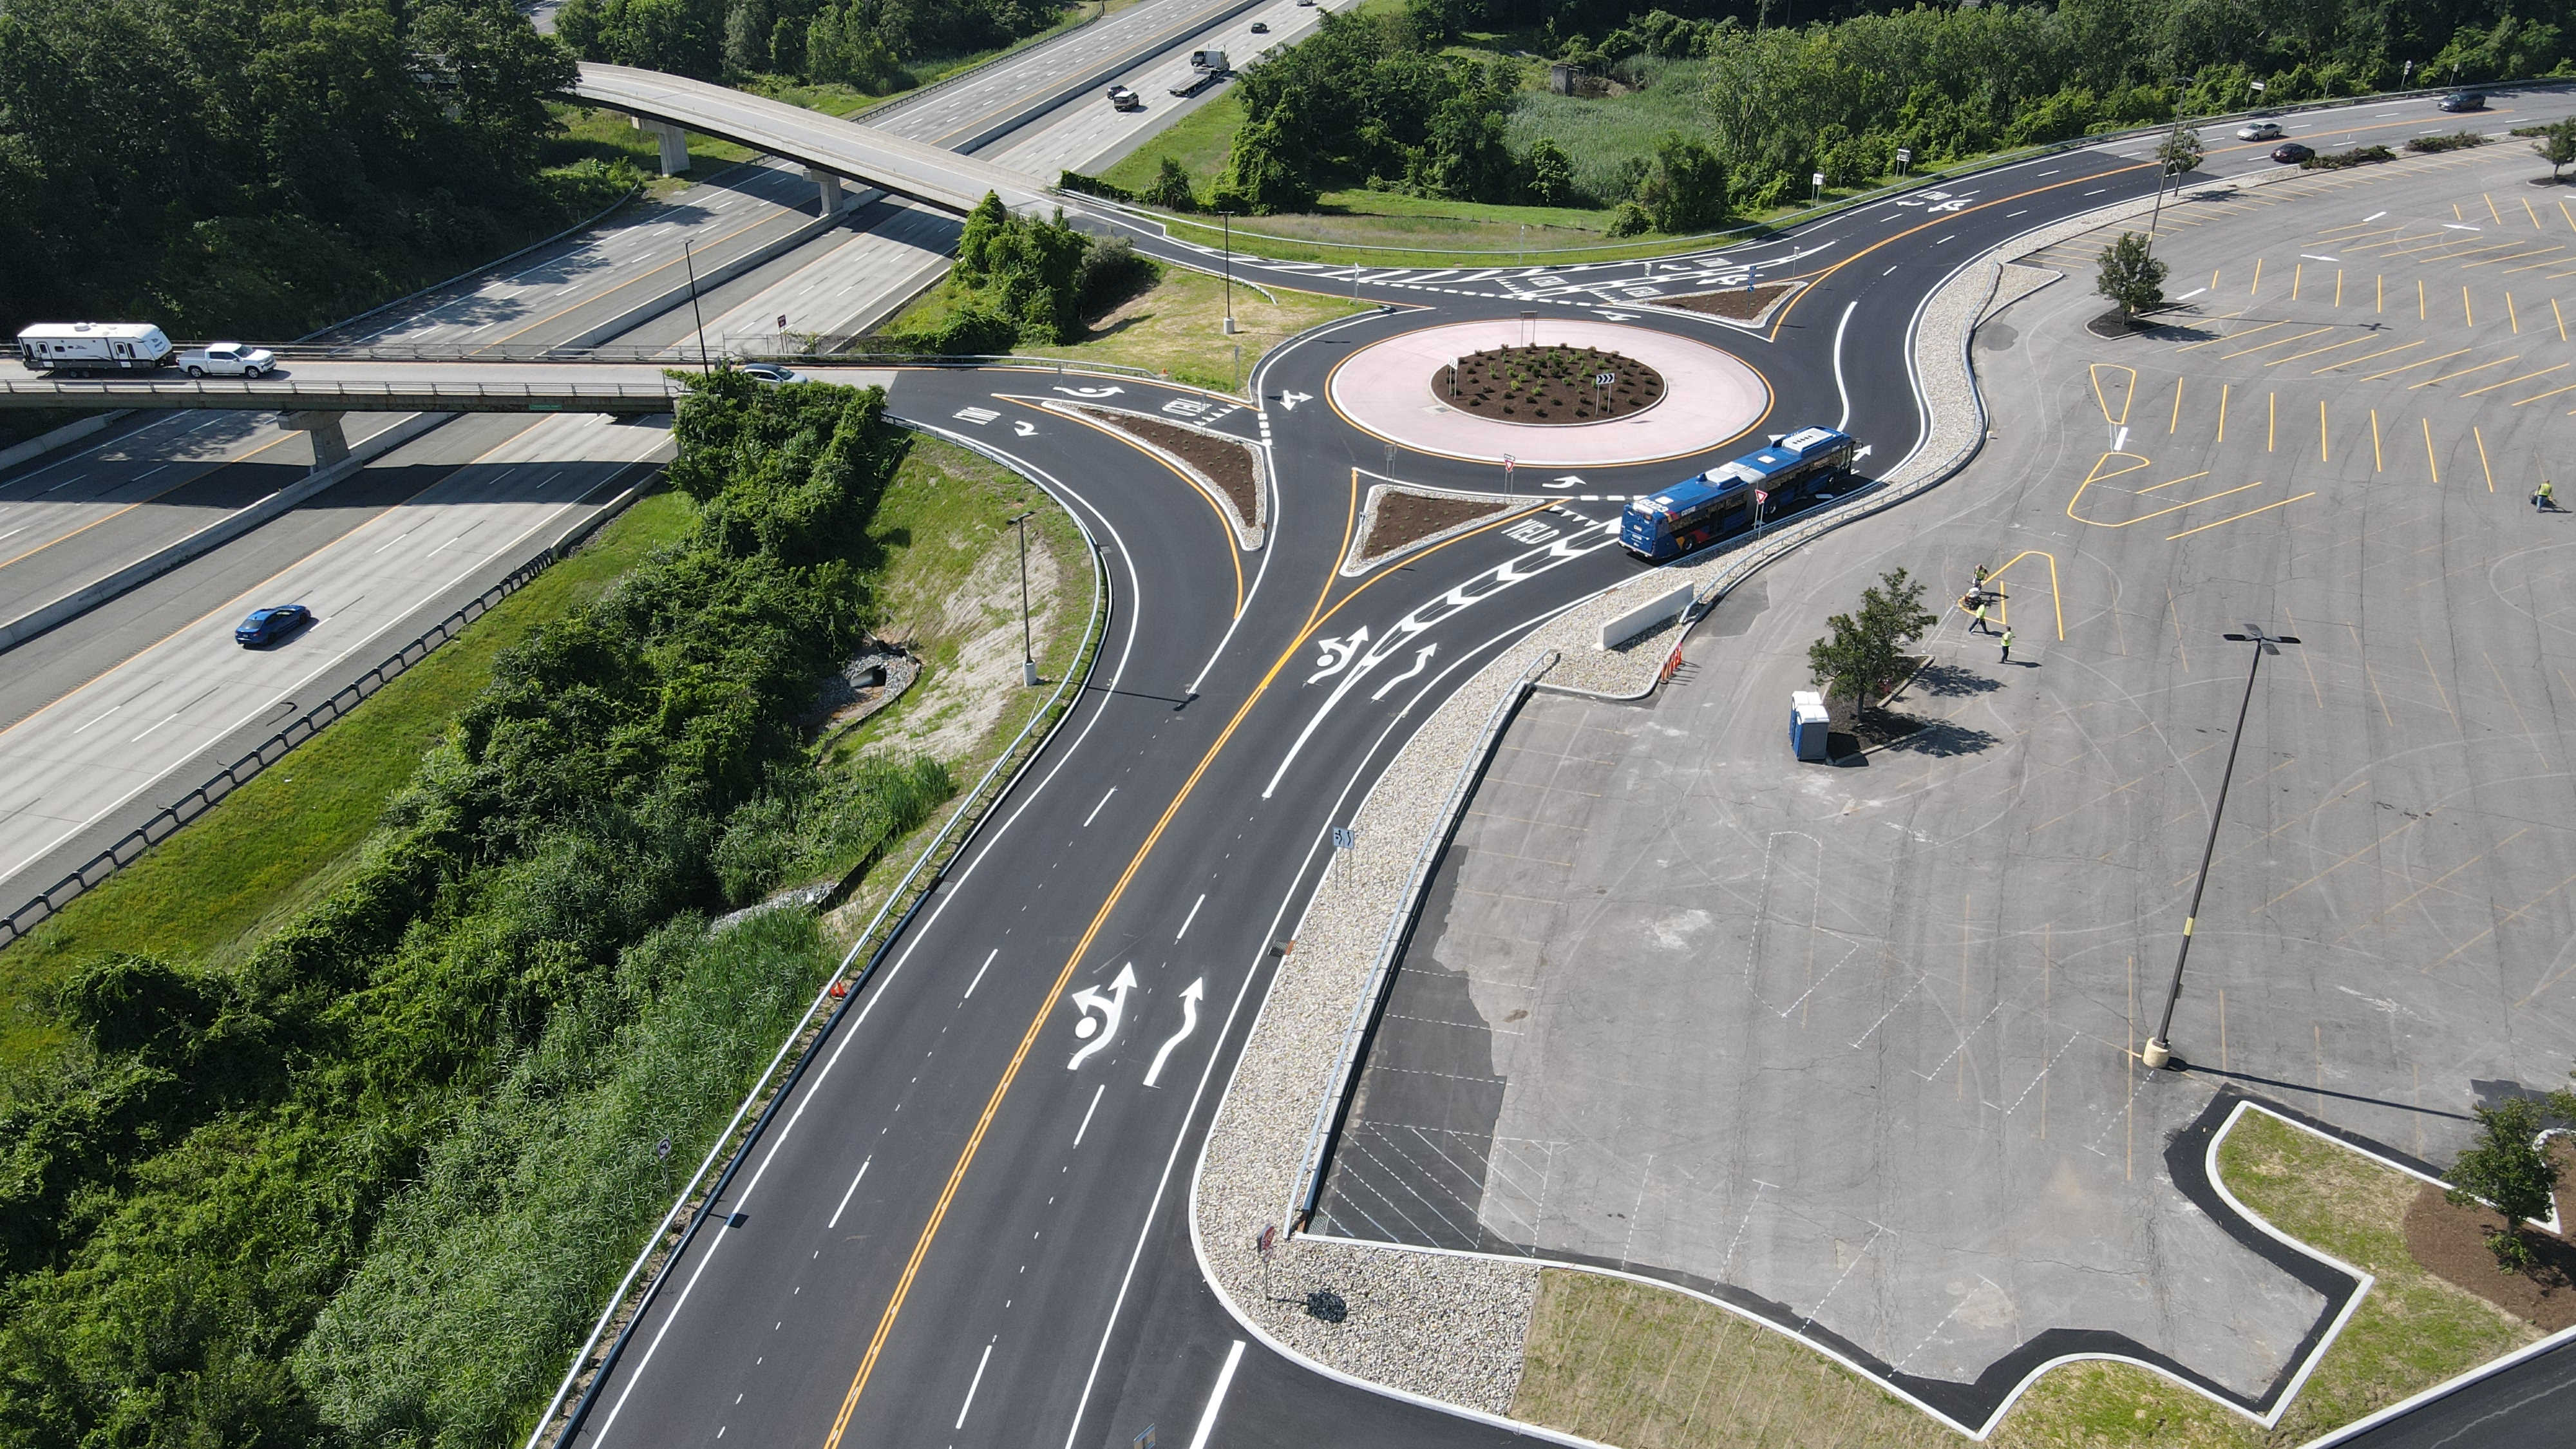 Picture of Completed Crossgates Mall Roundabout from Drone